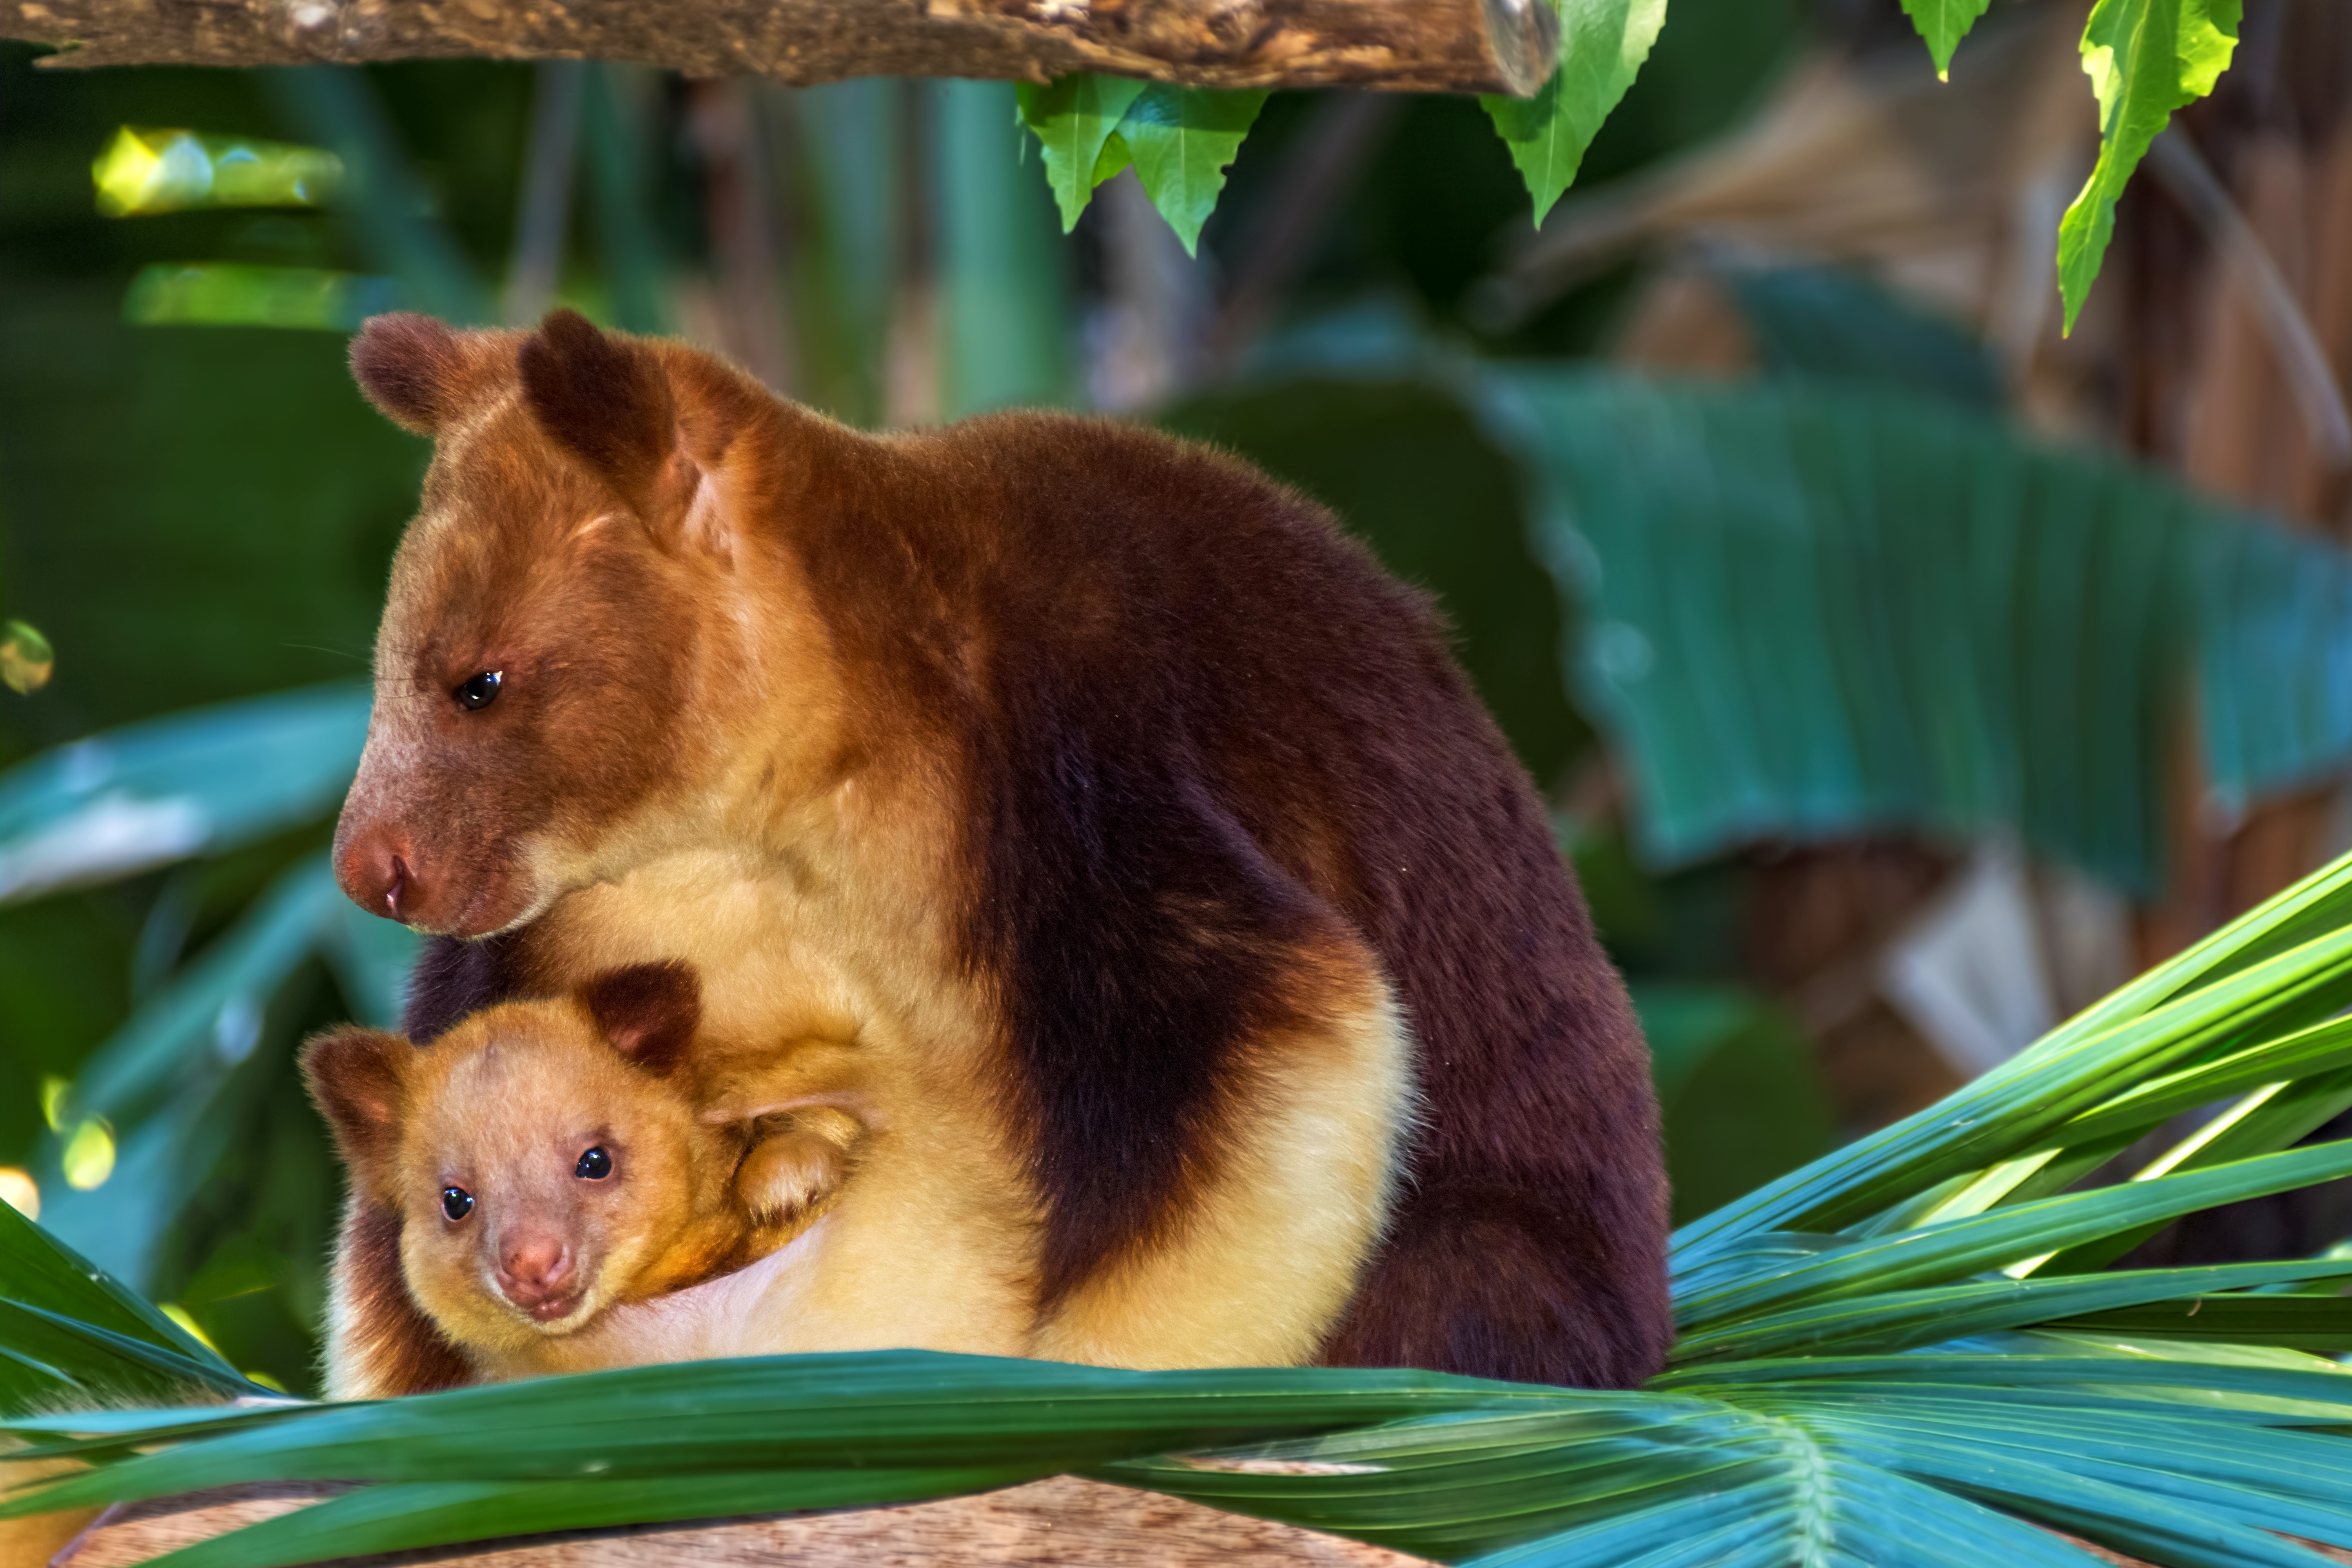 A tree kangaroo just hopped back into existence after 90 years